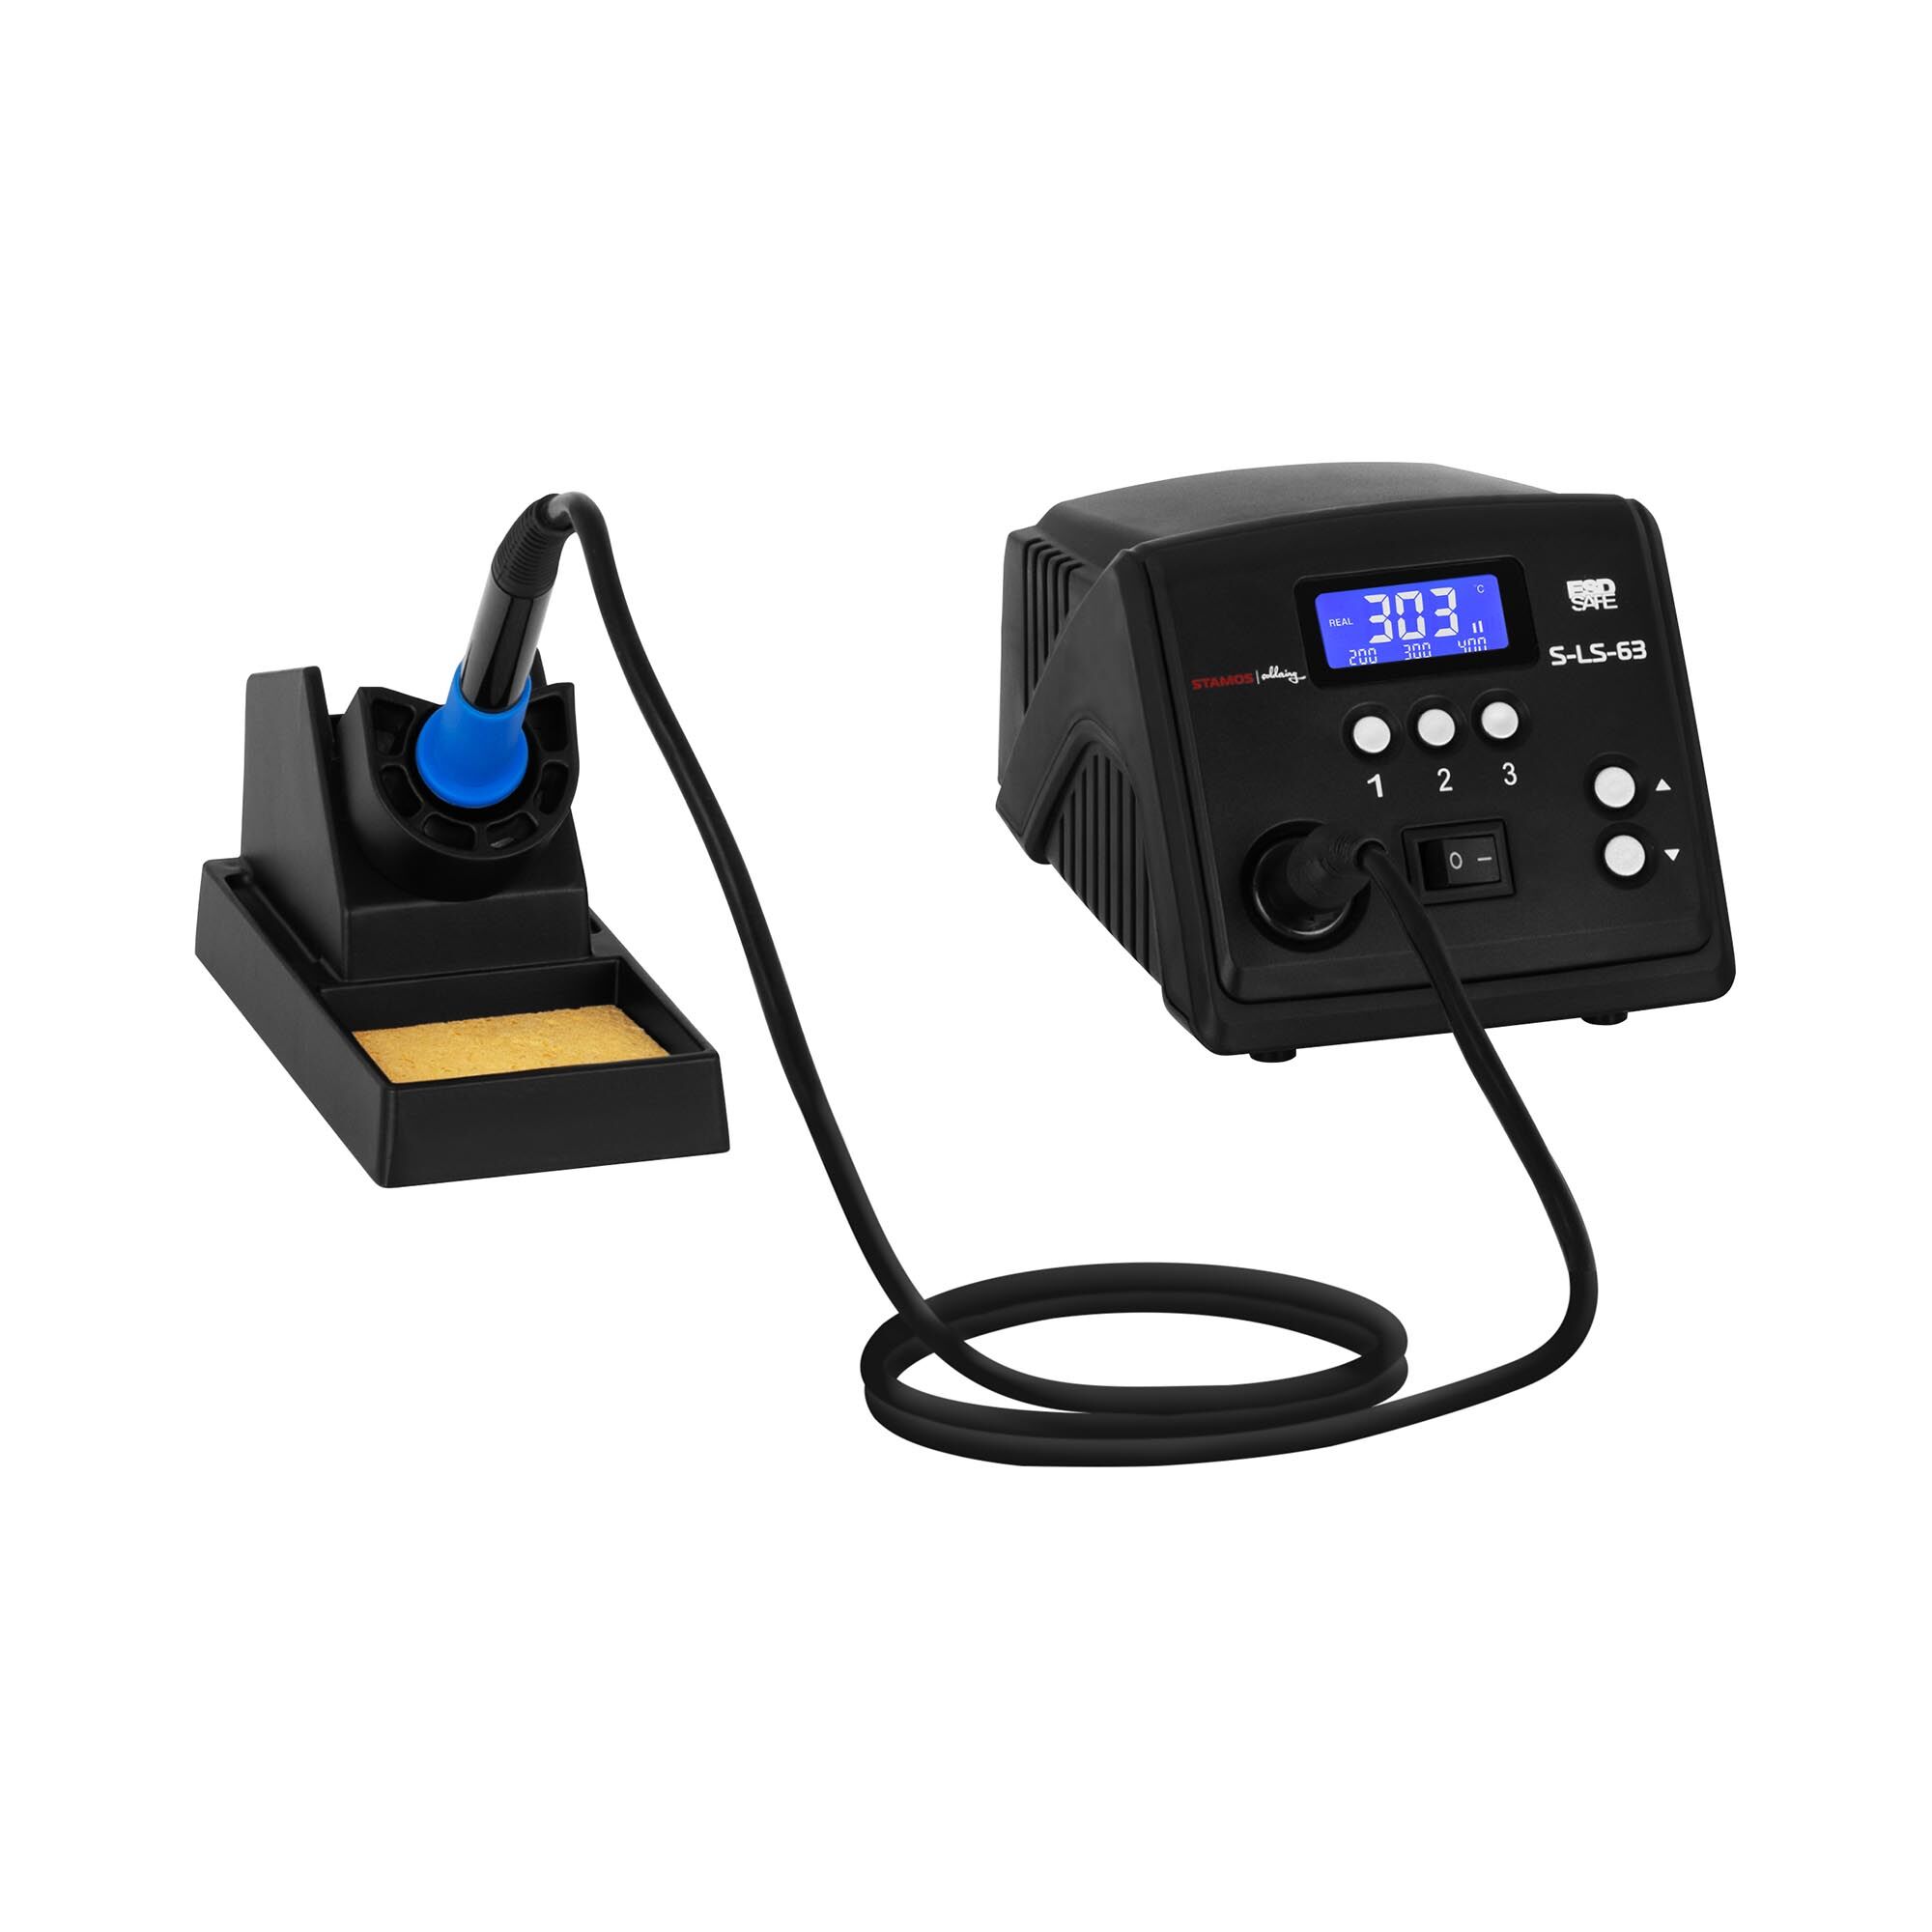 Stamos Soldering Soldering Station - digital - with soldering iron and holder - 100 W - LCD